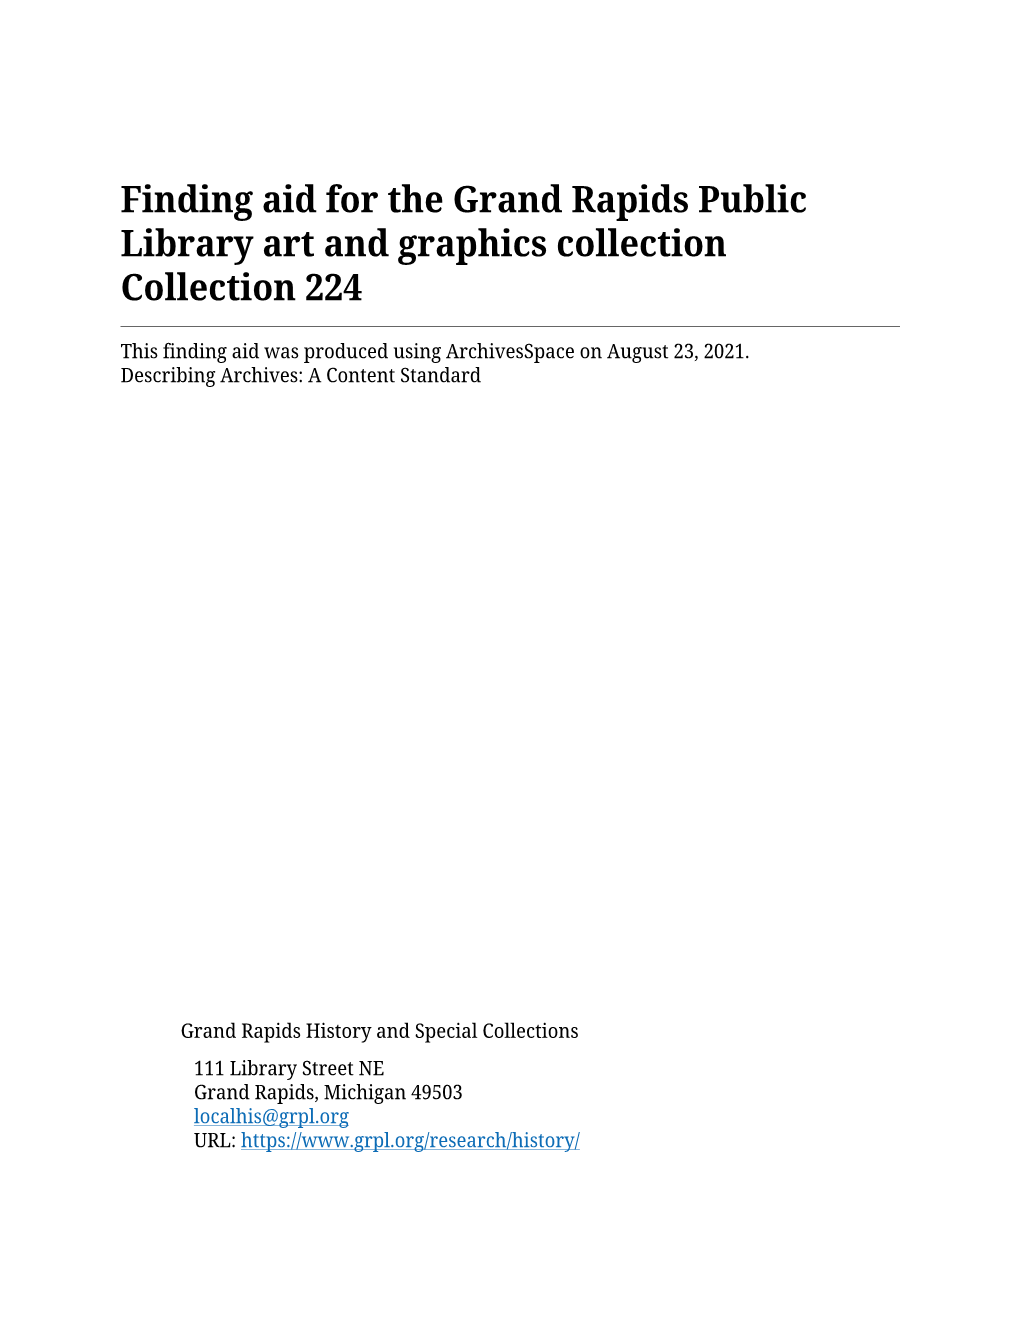 Finding Aid for the Grand Rapids Public Library Art and Graphics Collection Collection 224